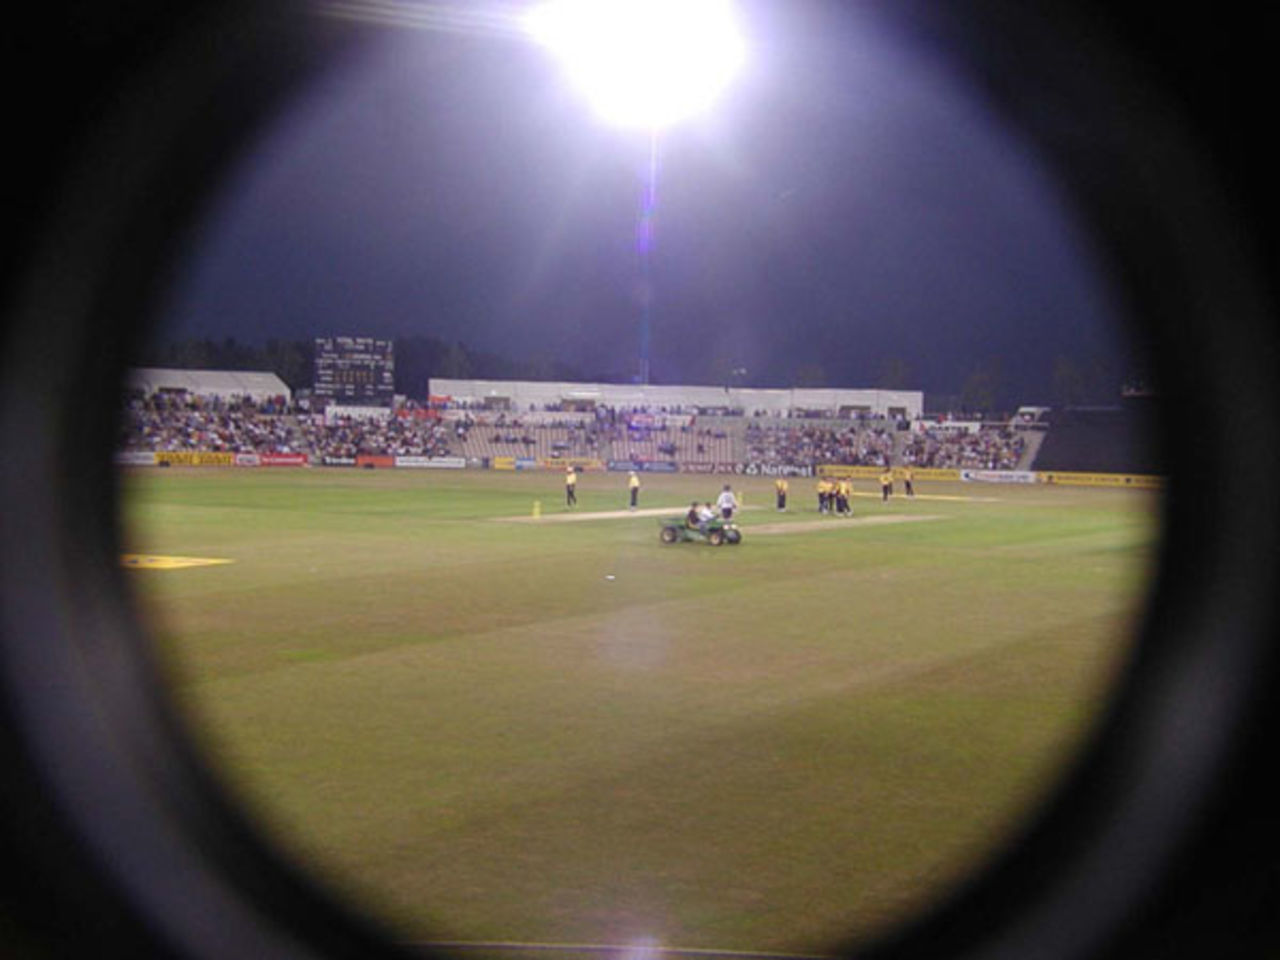 Hampshire scorer and photographer looks through the lens at the Day/Night match